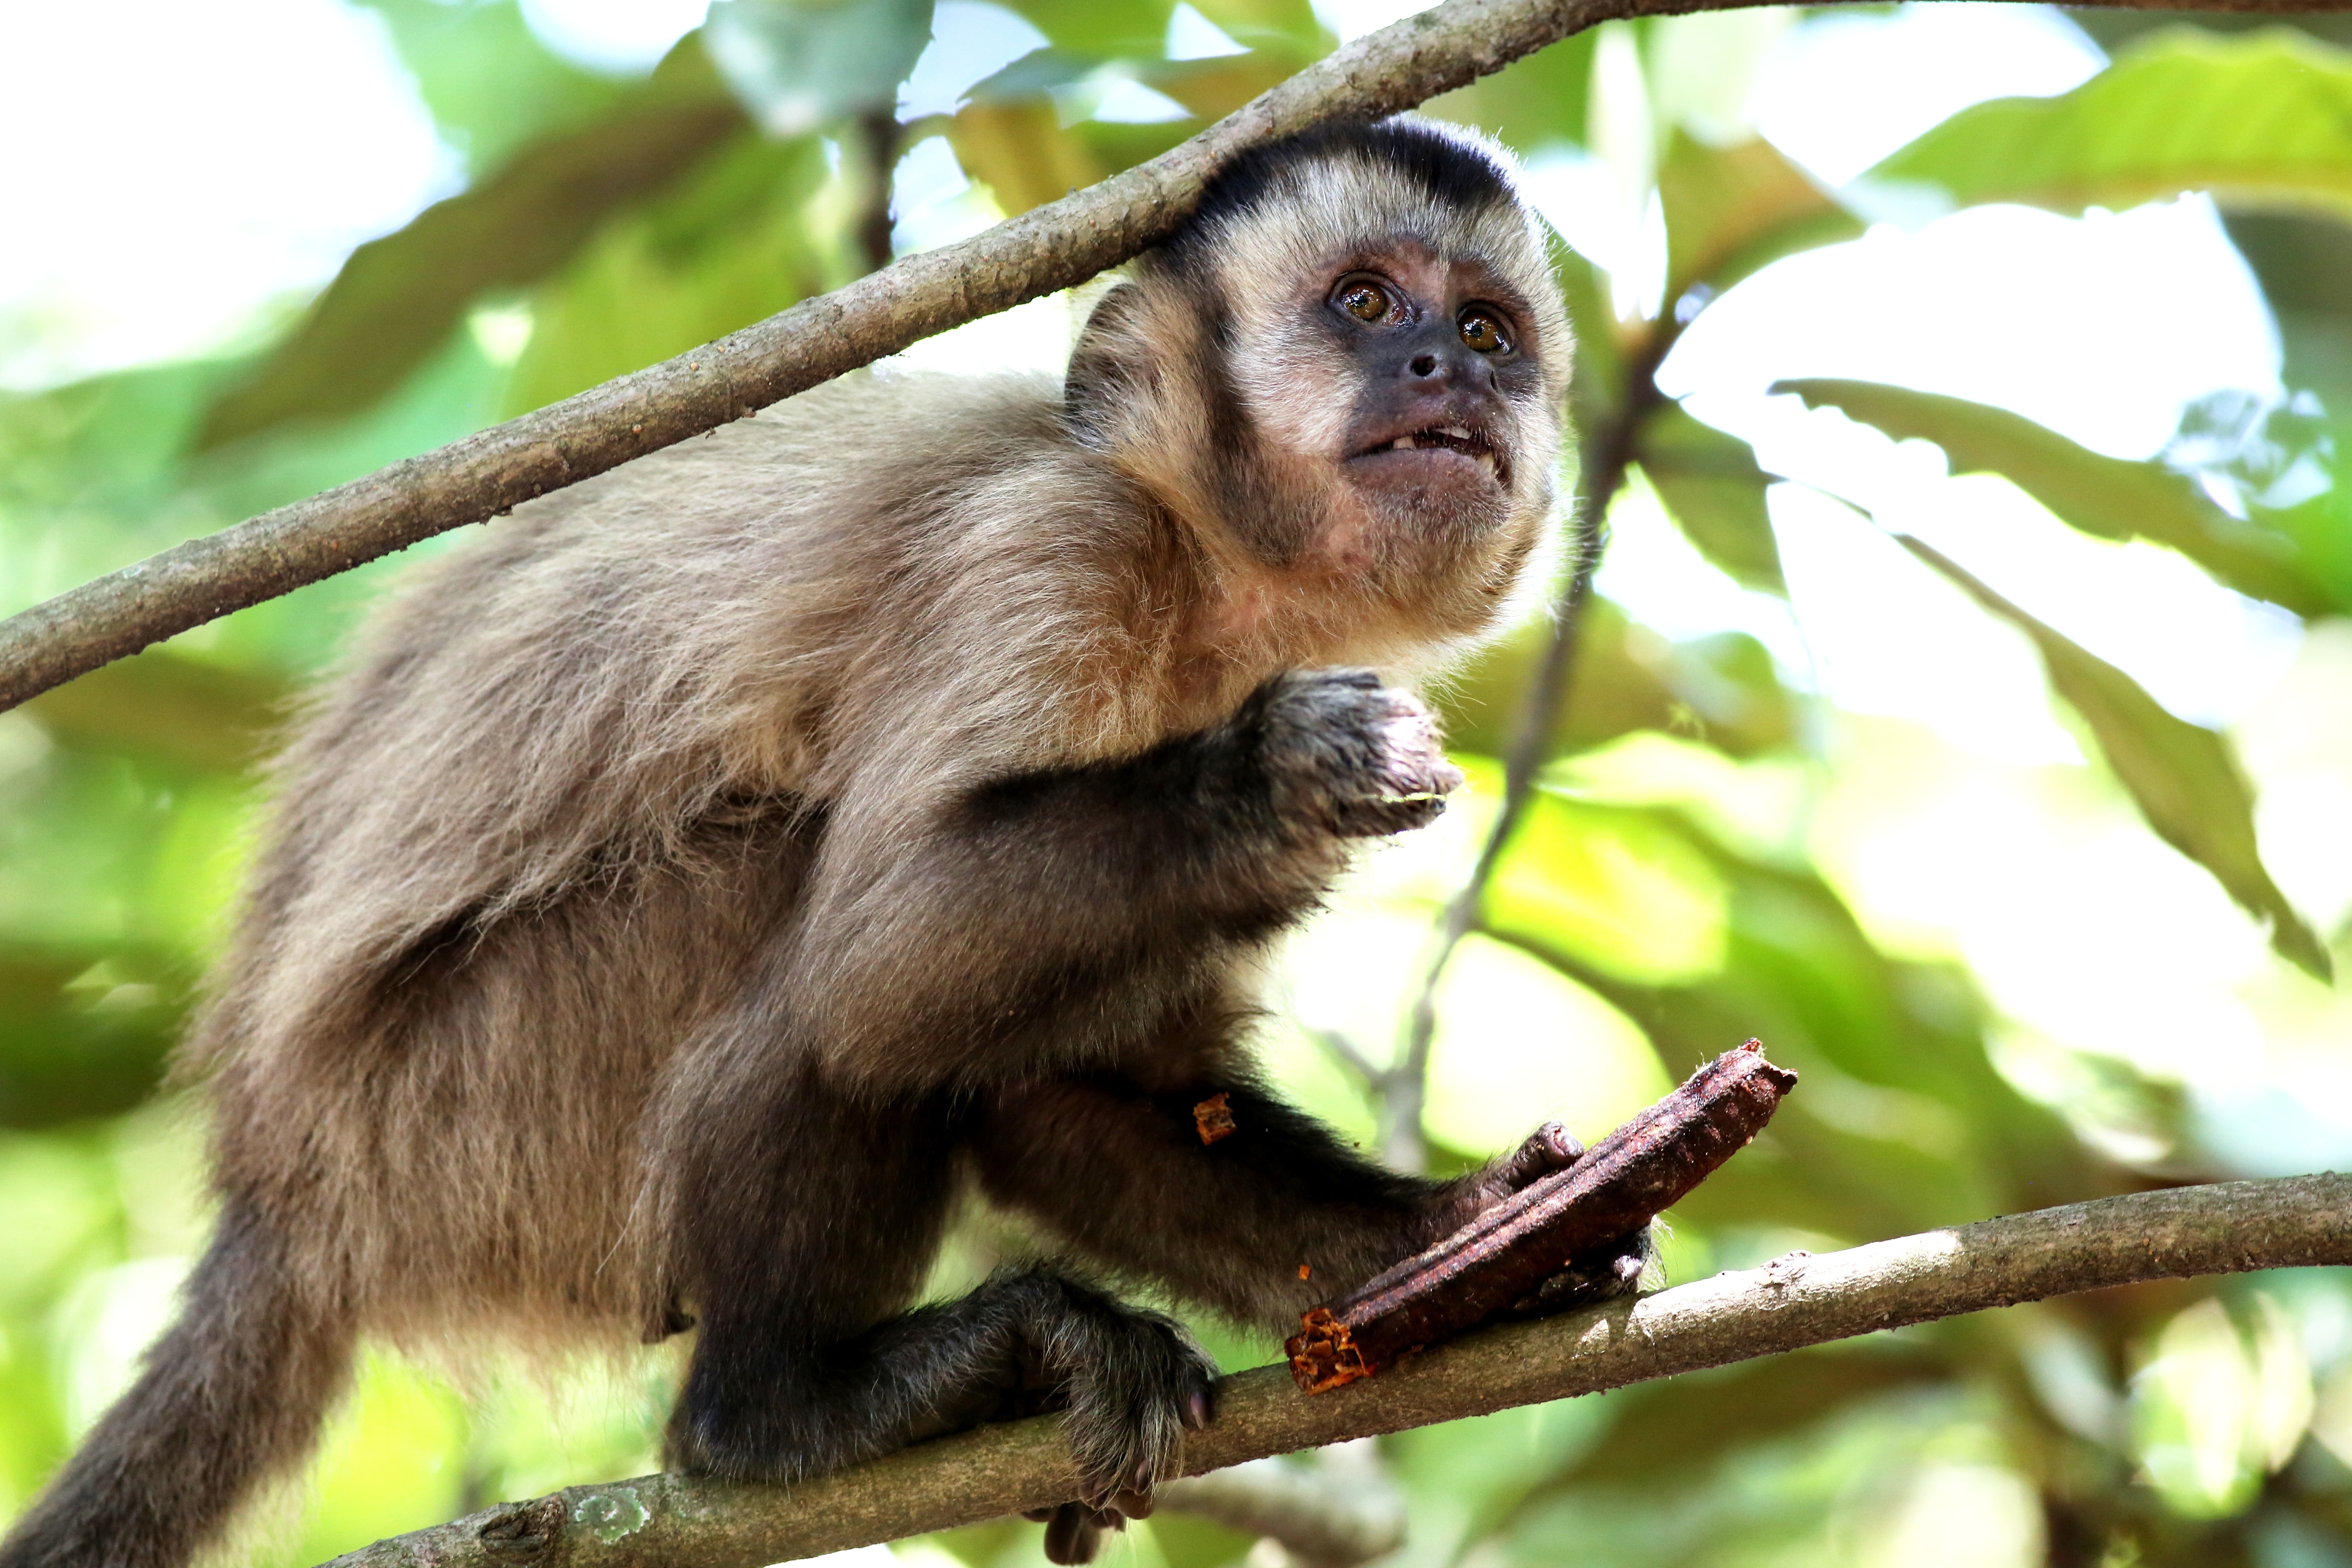 white and black primate eating fruit while on tree branch